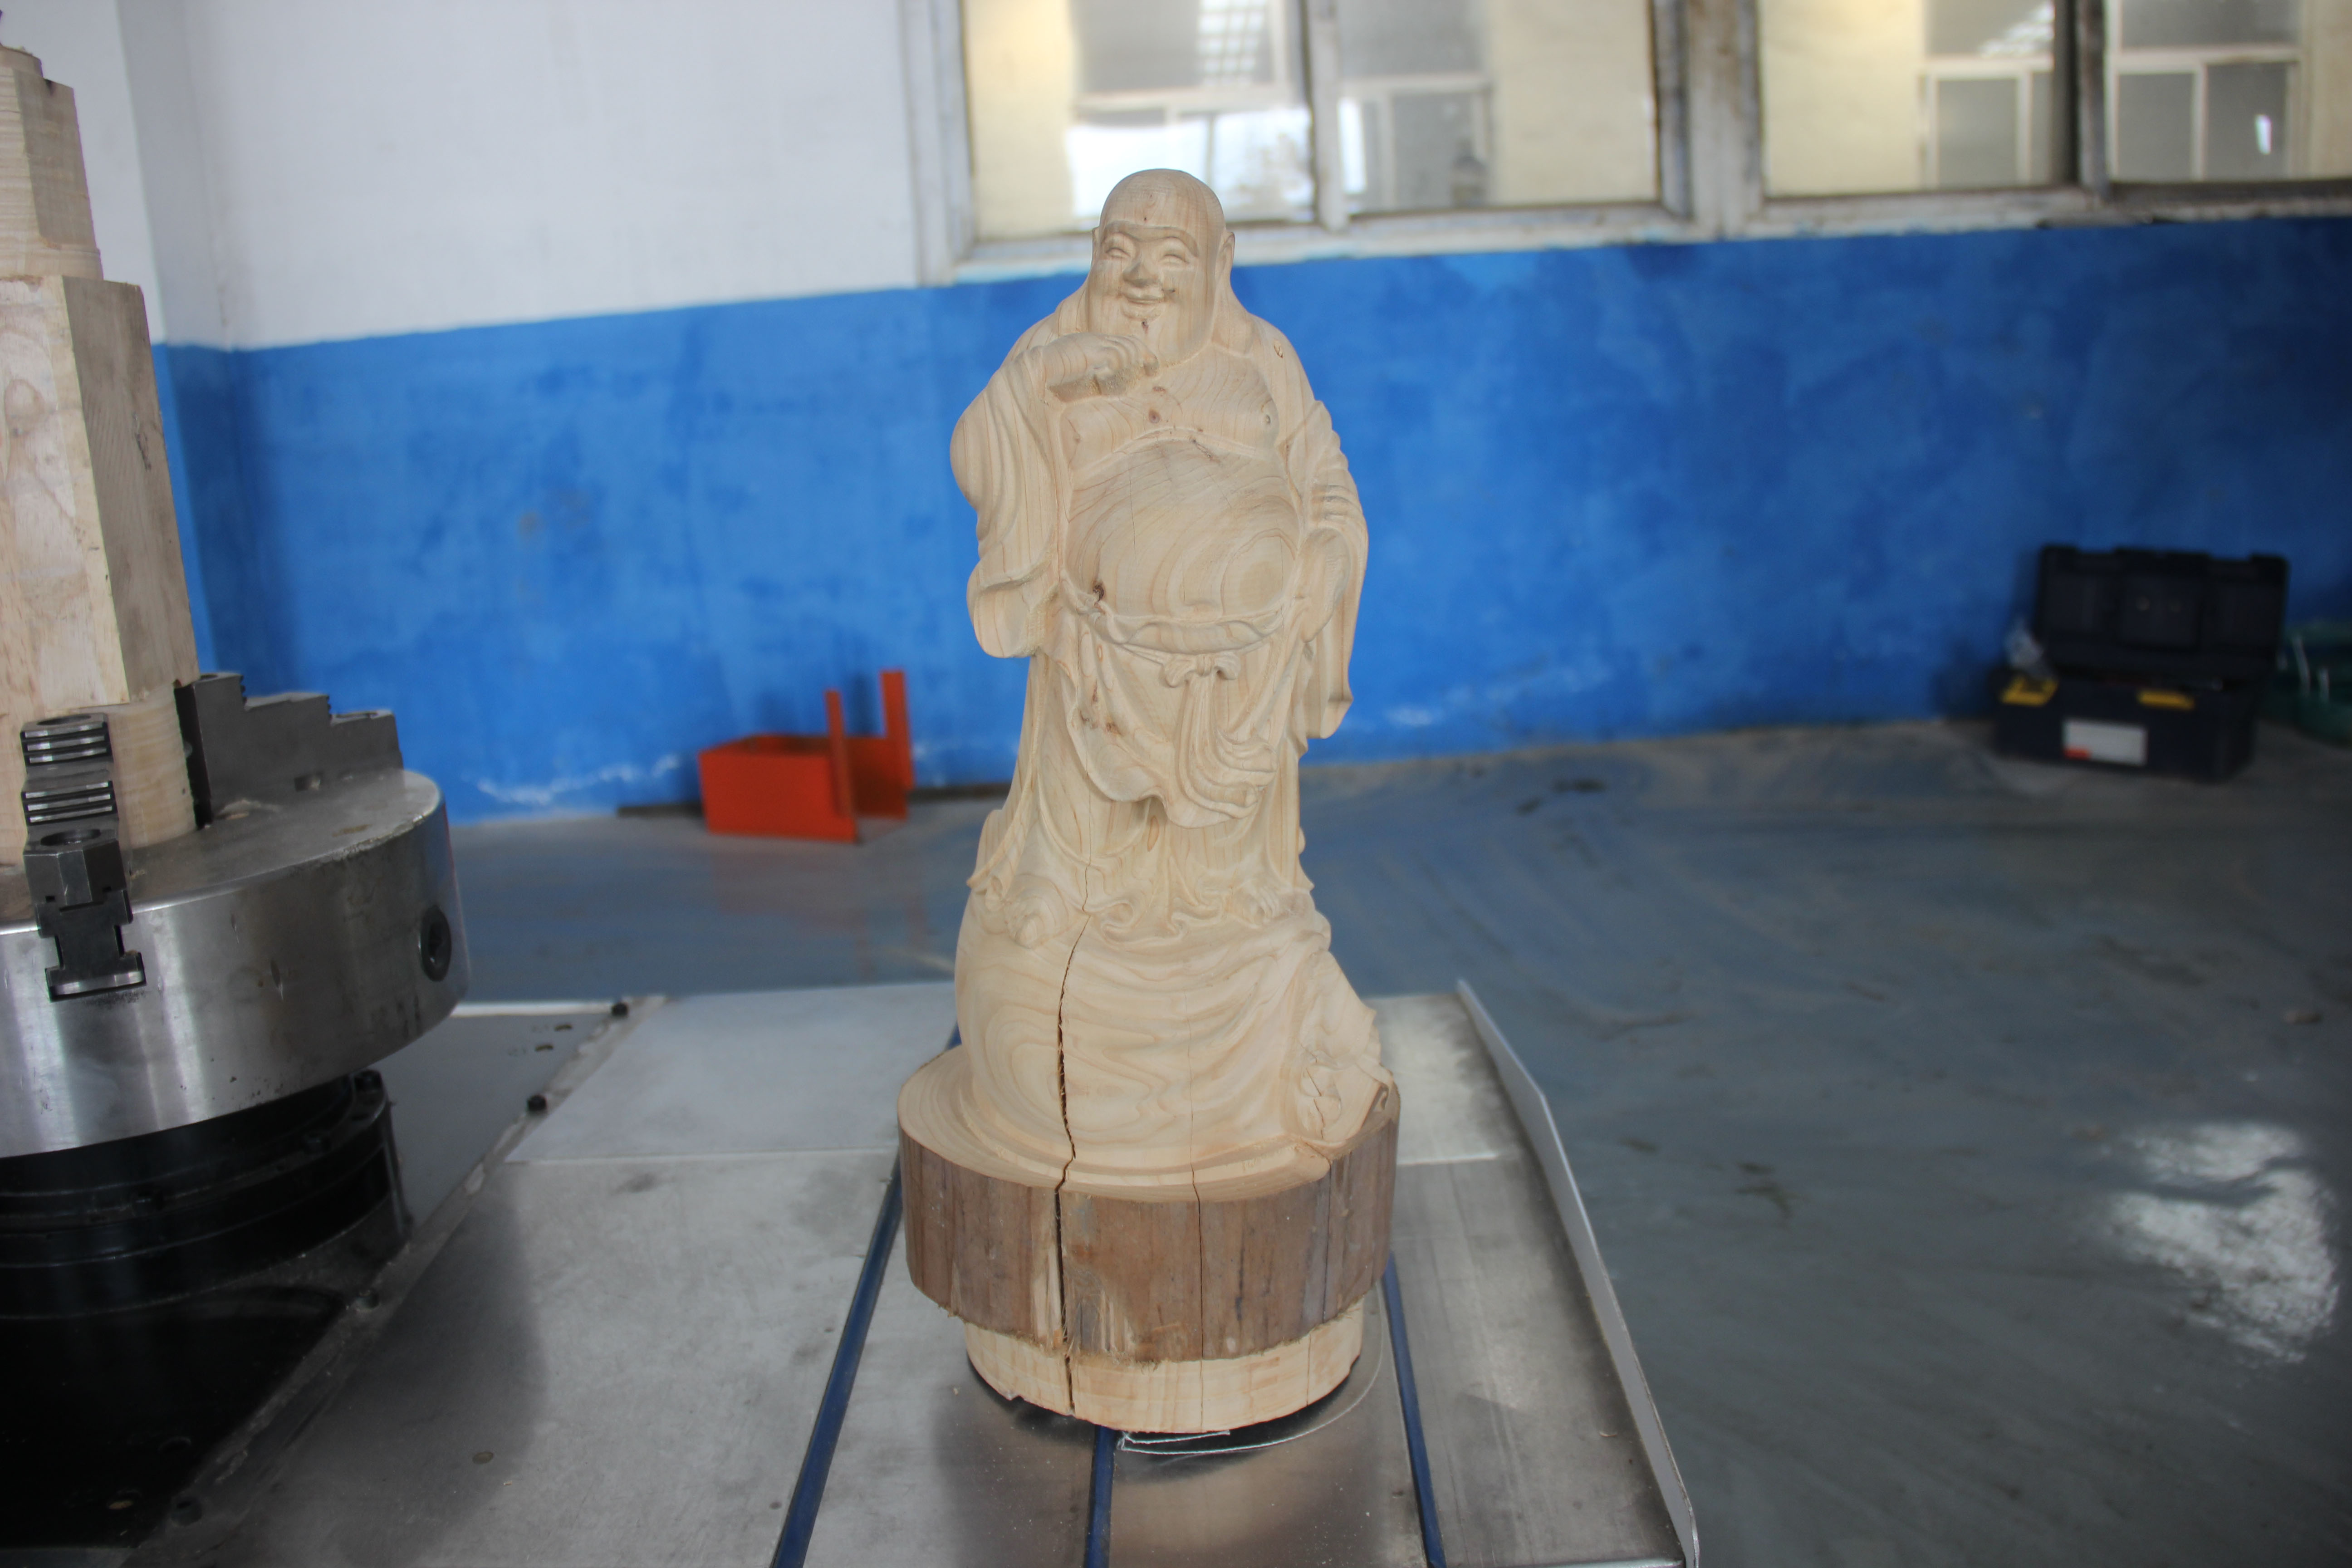 engraving cnc router